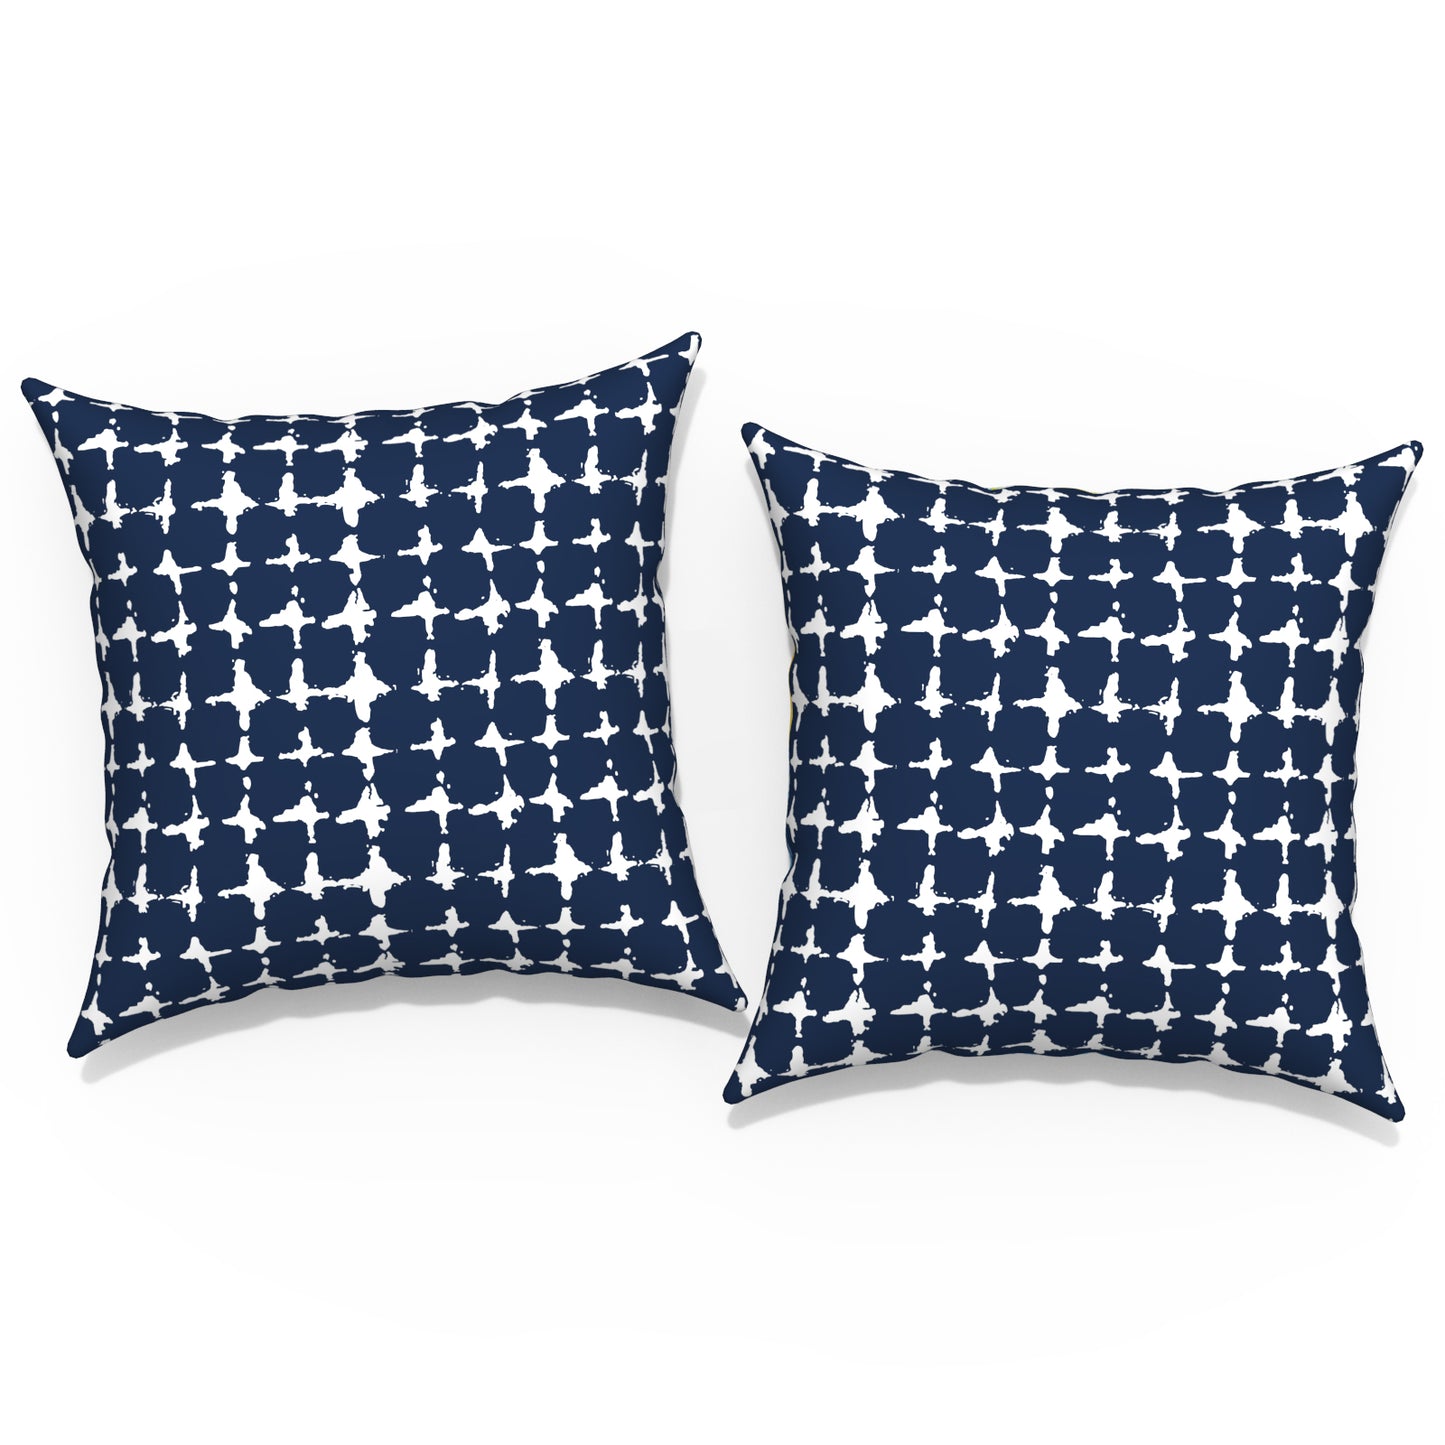 Melody Elephant Outdoor Throw Pillows with Inners, All Weather patio pillows set of 2, Square pillows Decorative for  home garden furniture, 20x20 Inch, Tie-Dye Navy